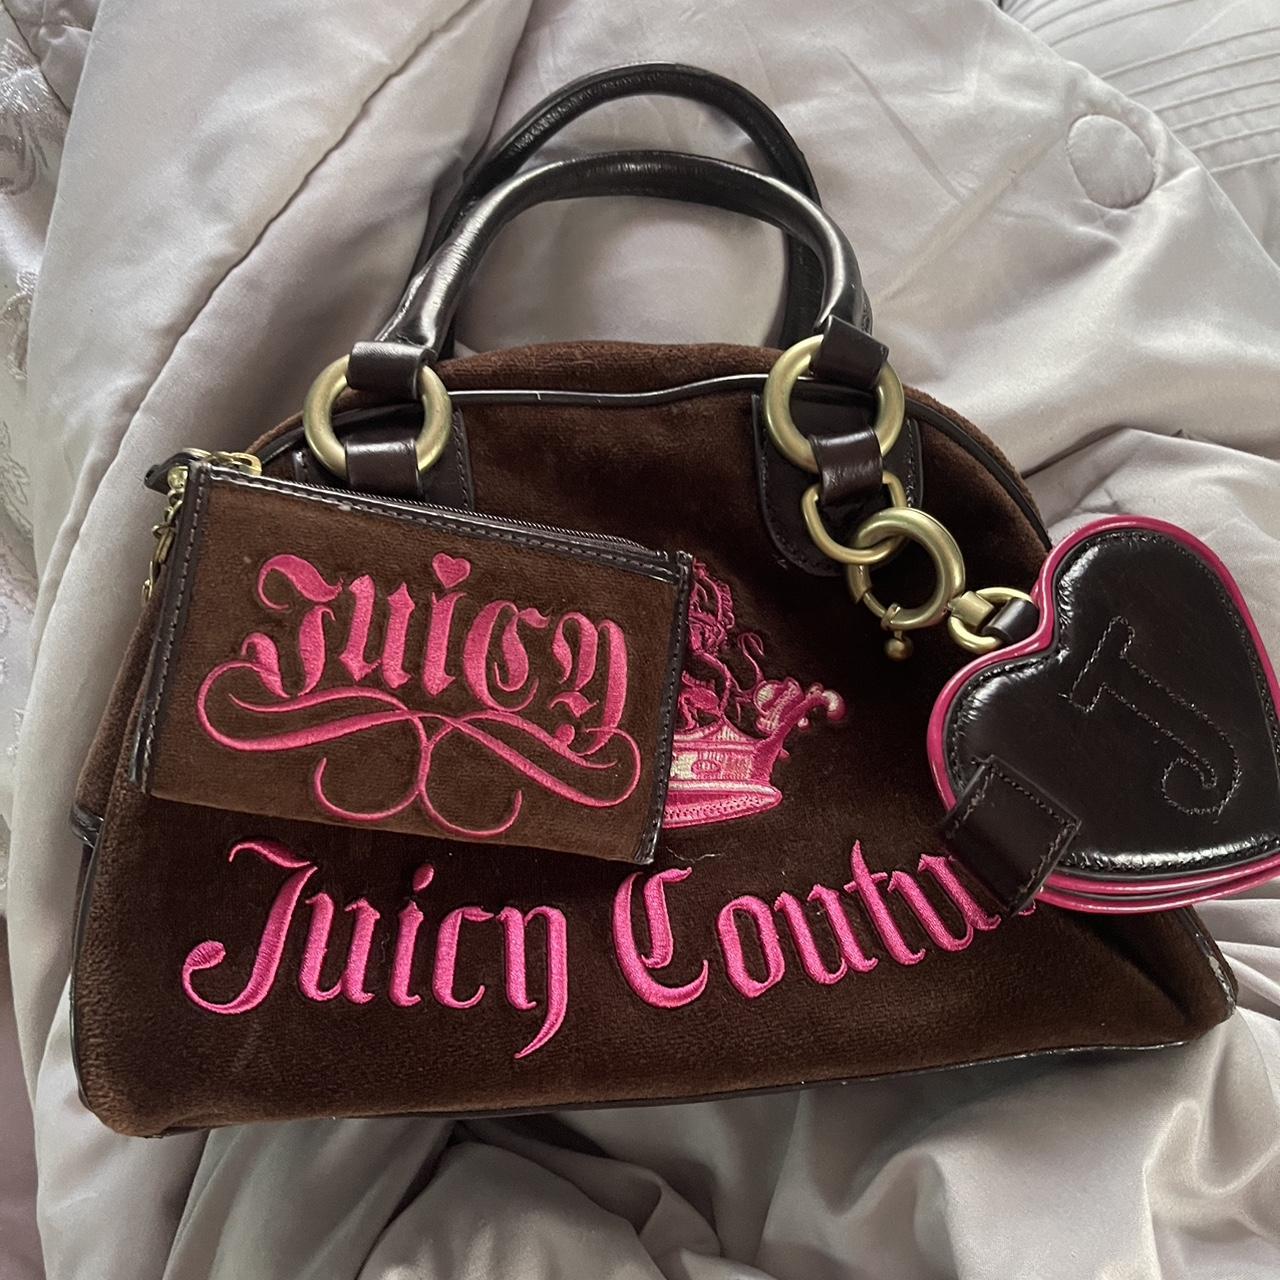 Juicy Couture Women's Brown and Pink Bag | Depop